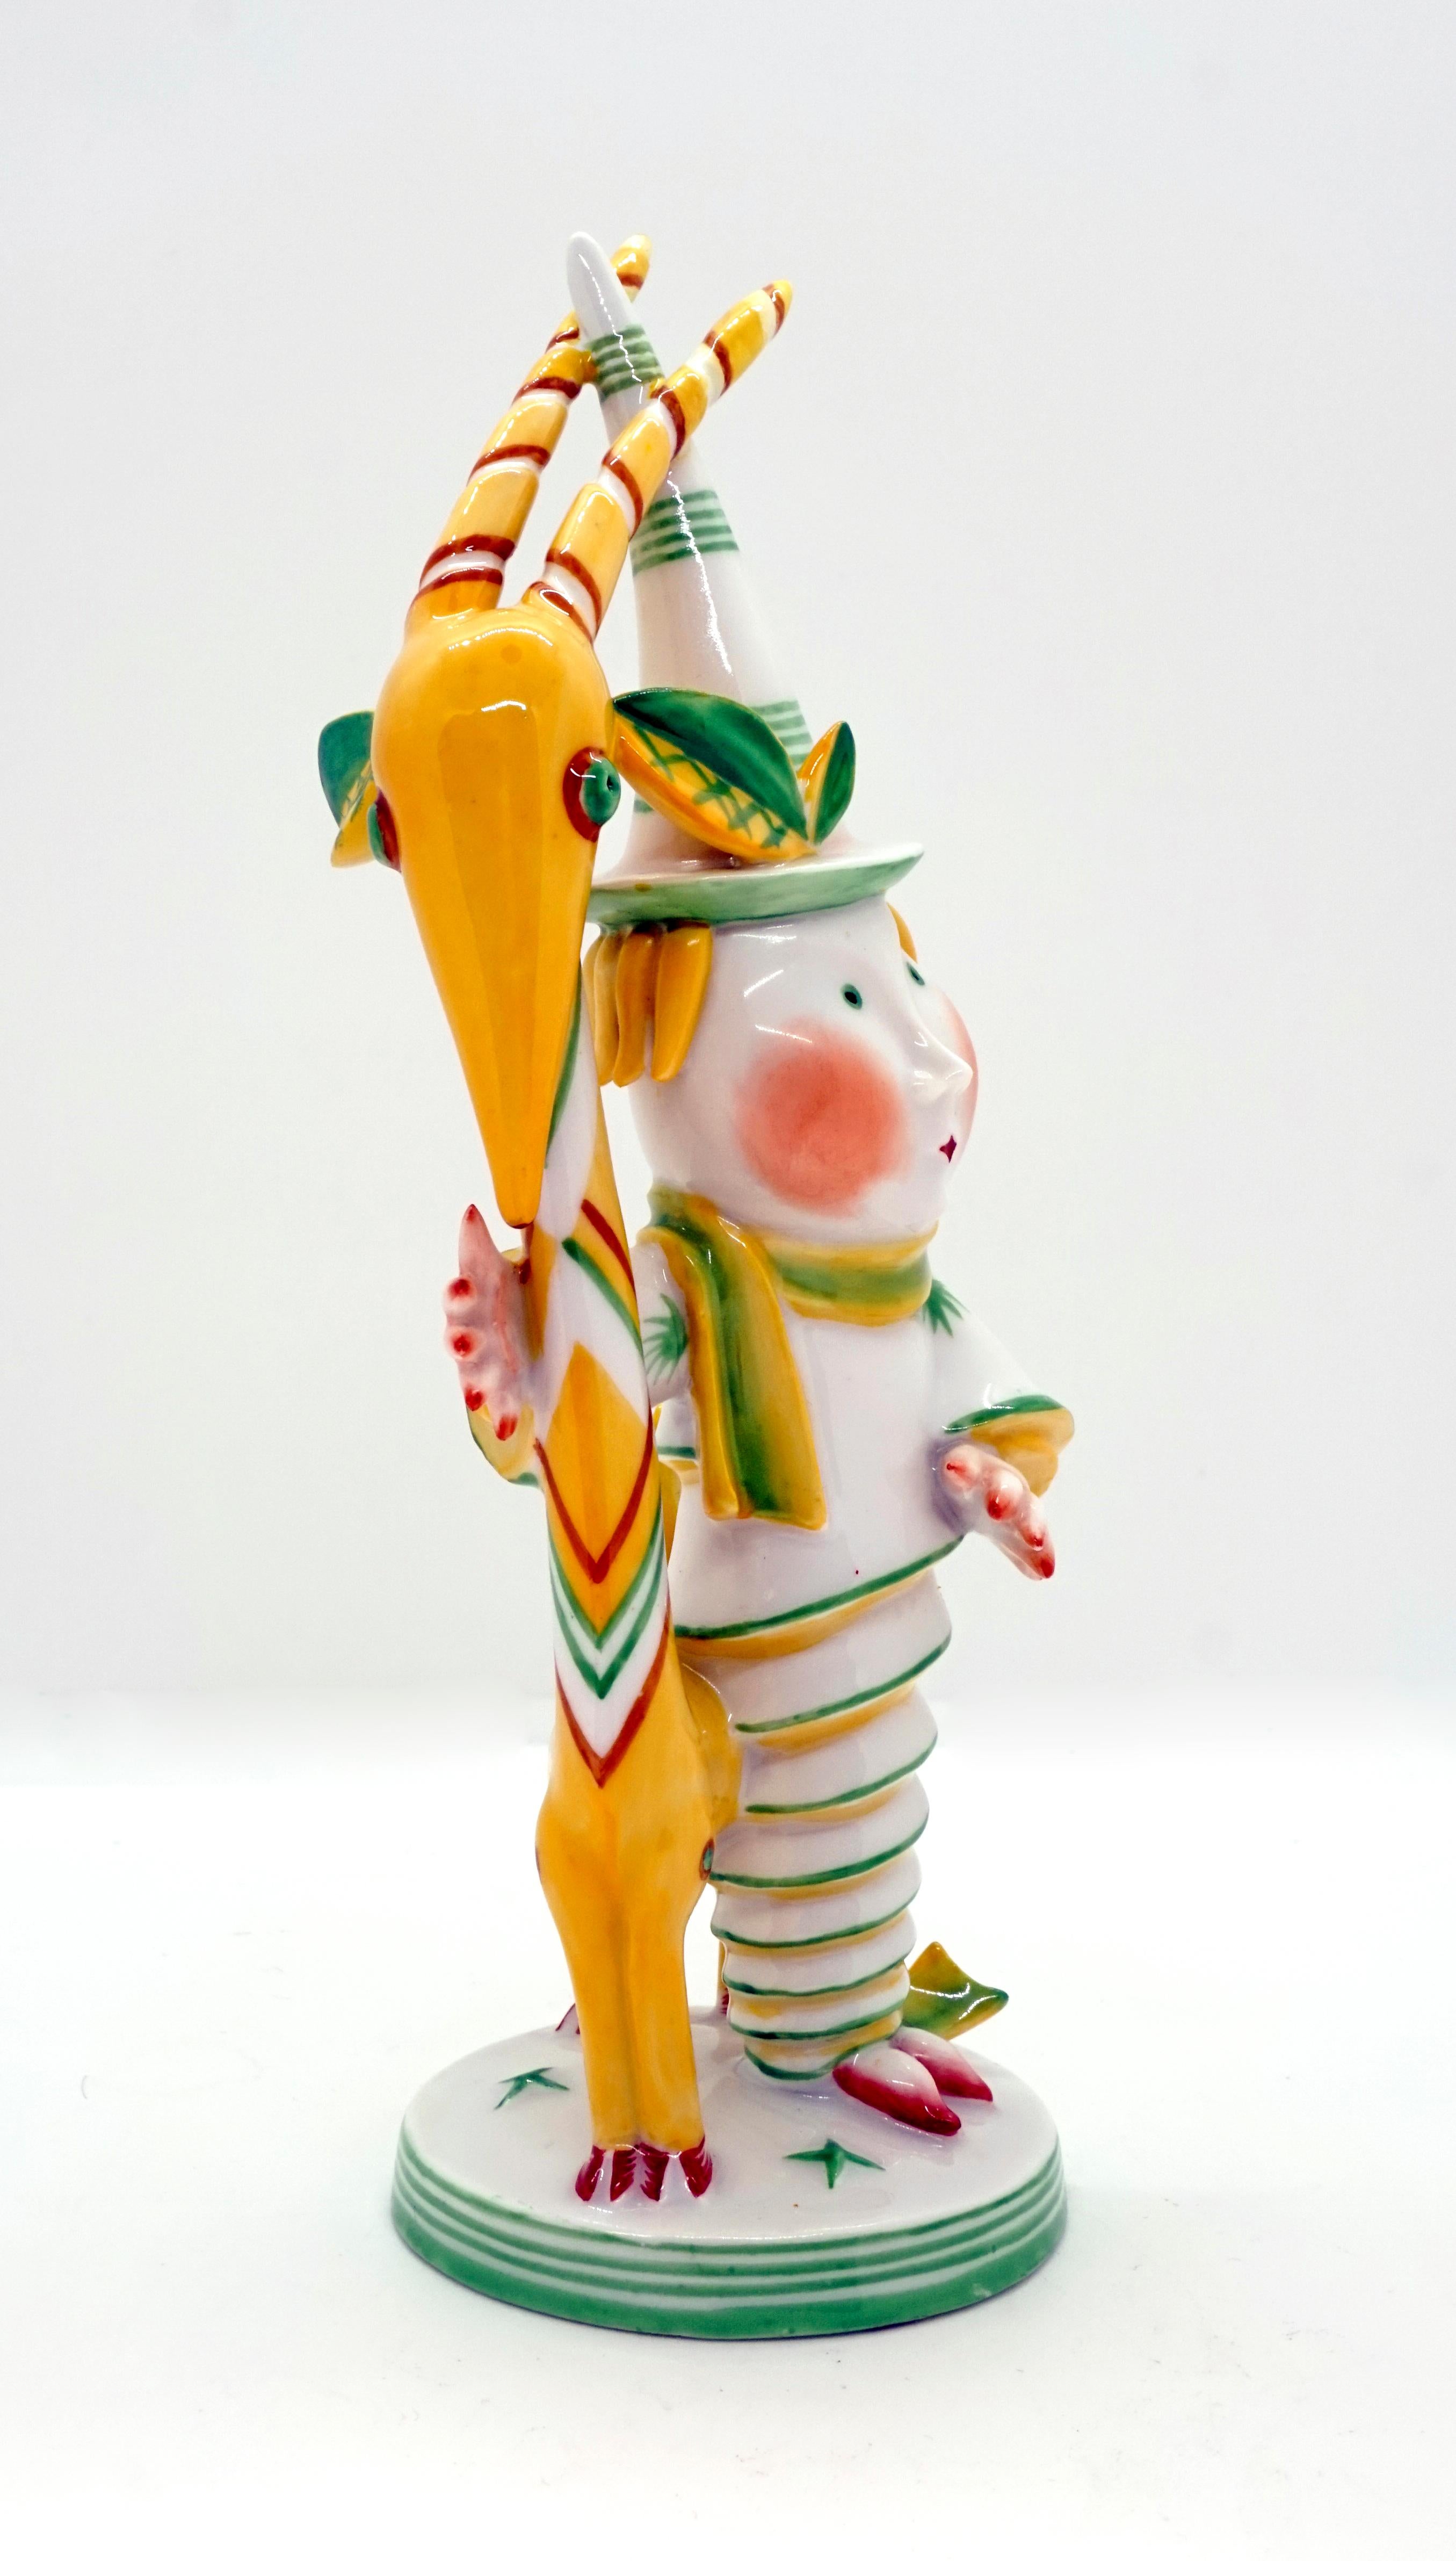 A man in a long dress wrapped like a spiral spring and a pointed hat hugs the animal with an excessively long neck standing next to him, with the horns and hat wedged together.
Painted in typical Art Deco style, in yellow, green and red, on a flat,